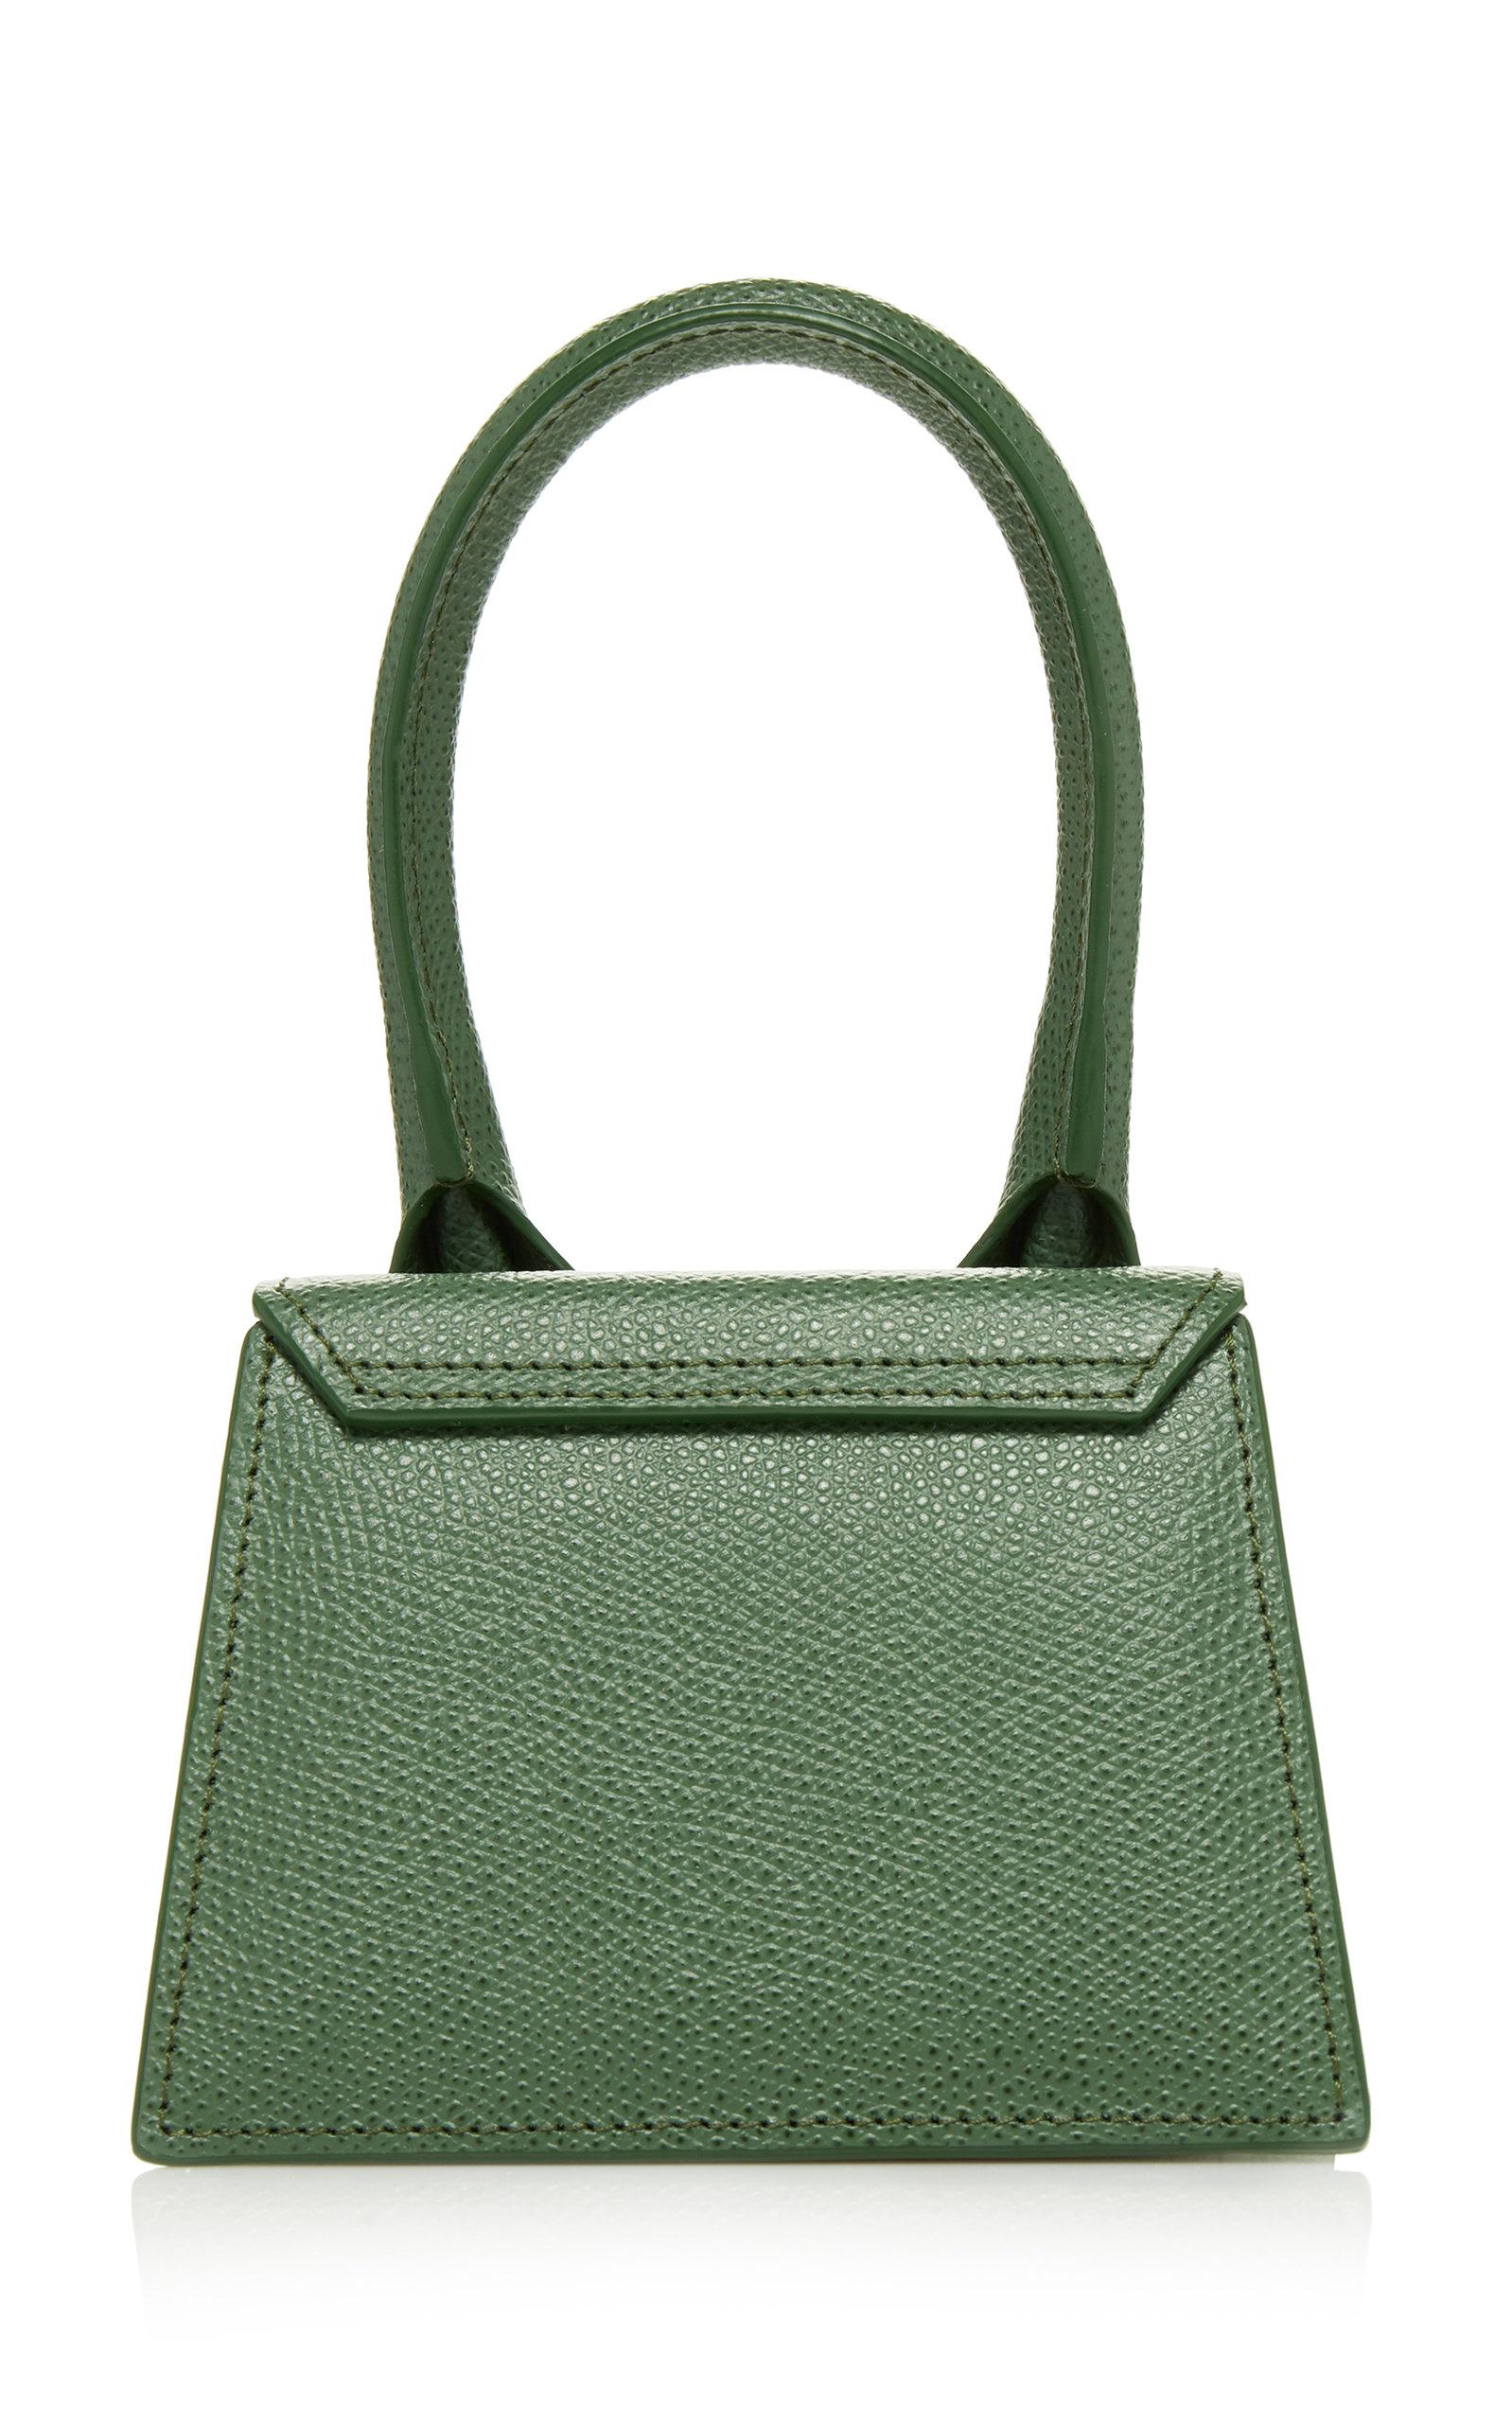 Jacquemus Le Chiquito Mini Leather Bag in Green - Lyst